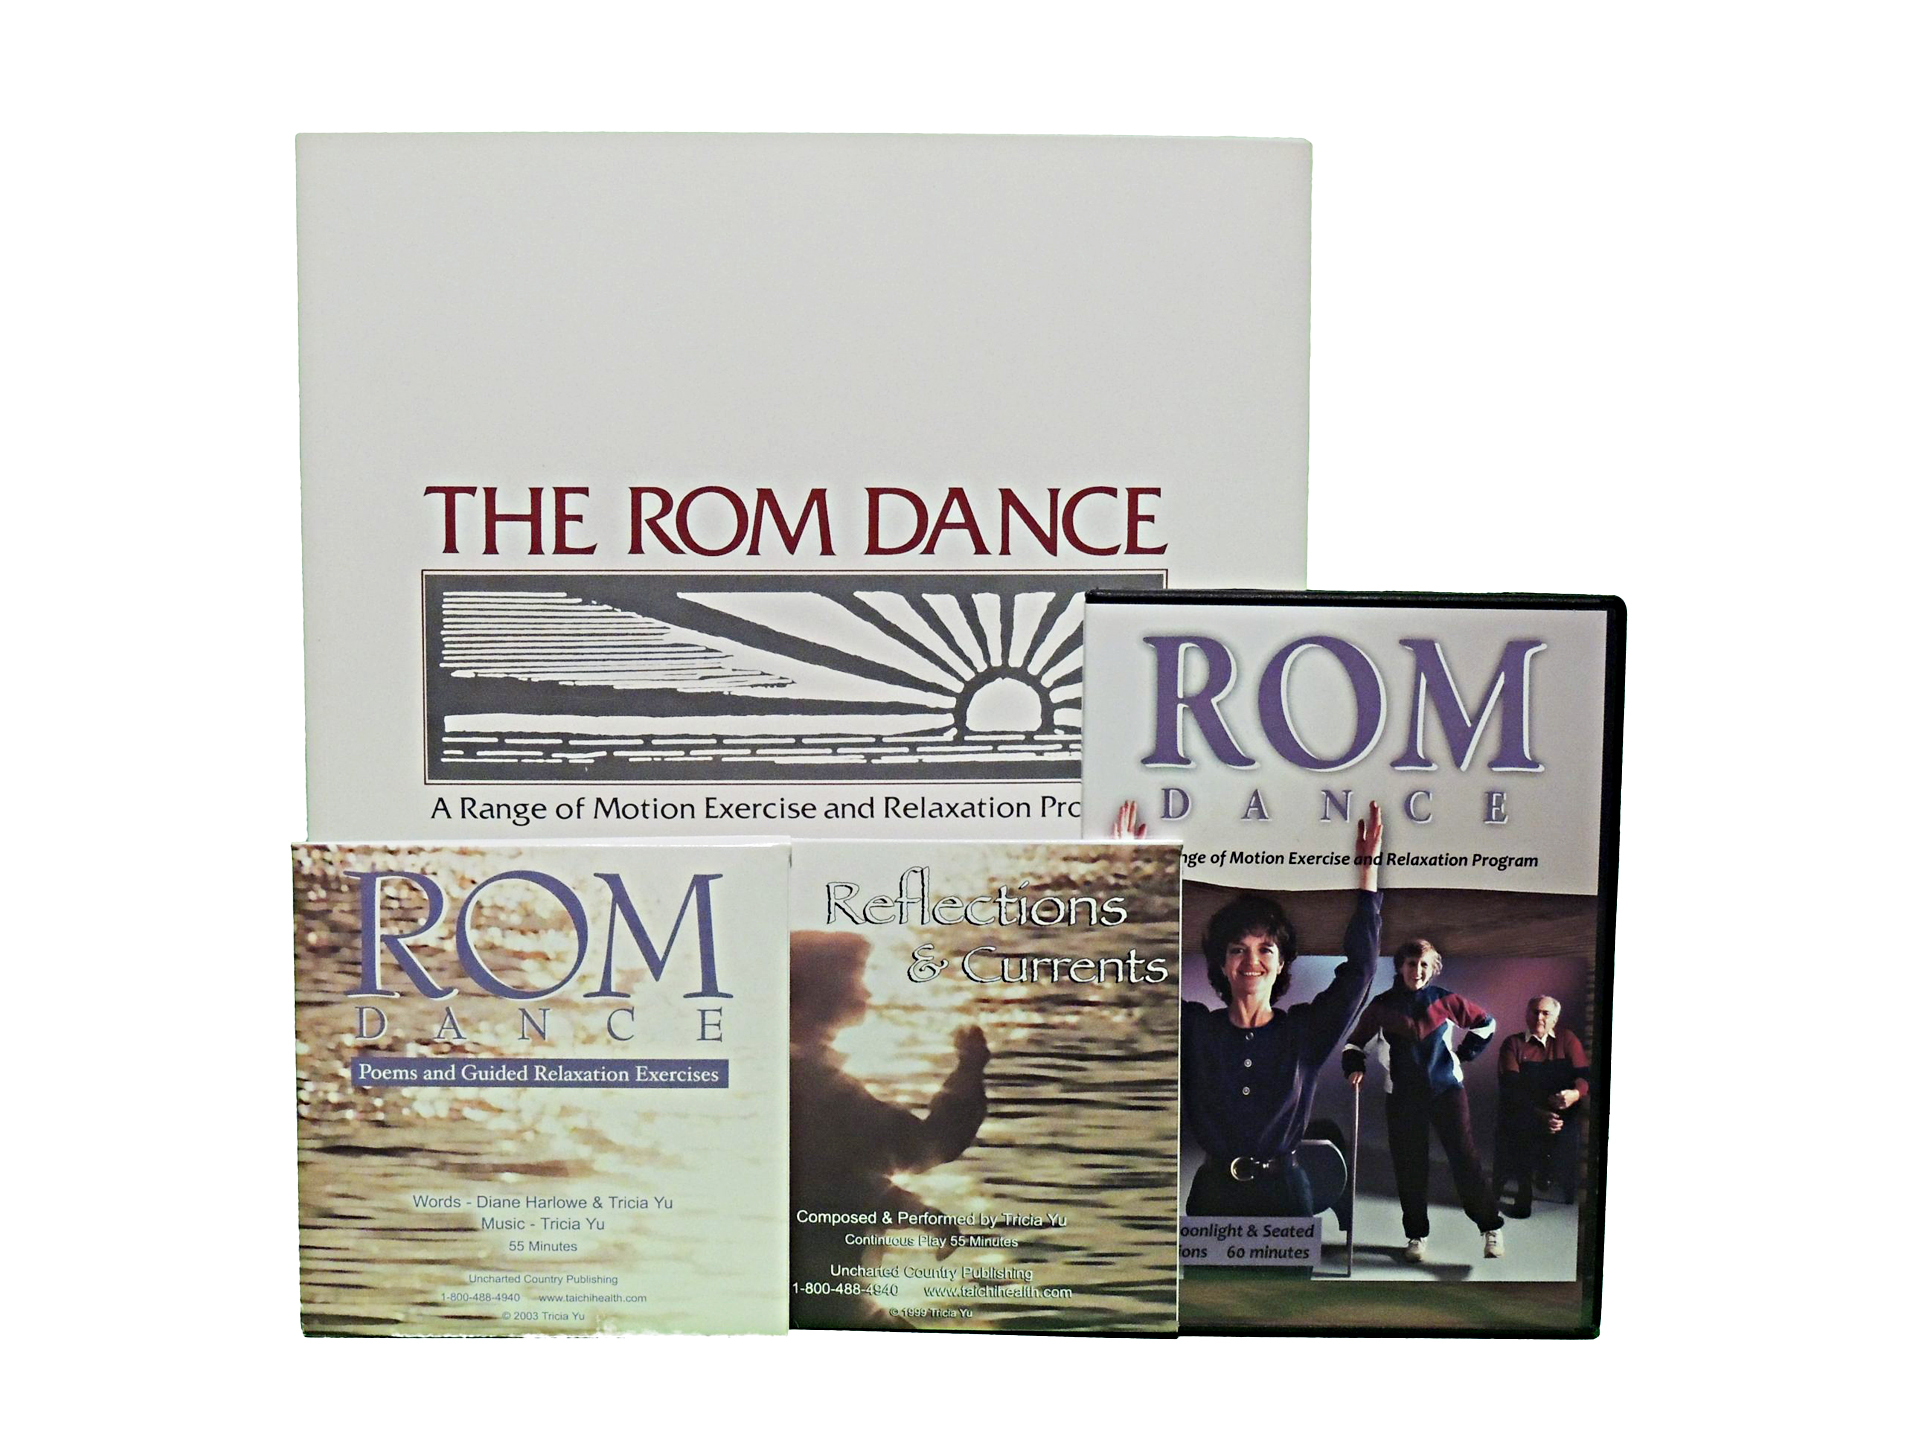 ROM Dance Professional Media Set (Book, CDs, and DVD) - Tai Chi Health